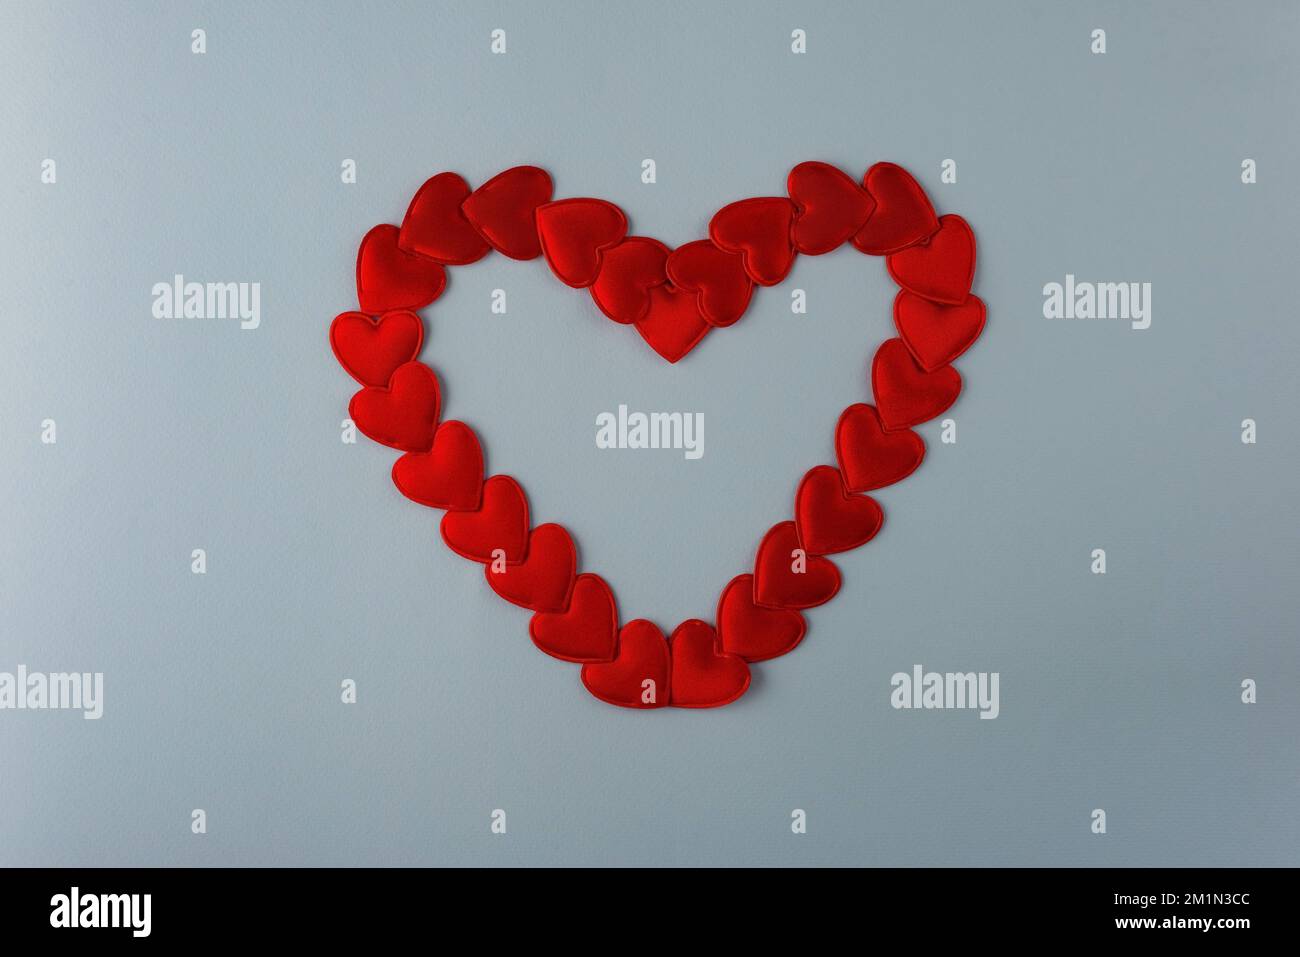 heart laid out from small red hearts on a blue background. Stock Photo